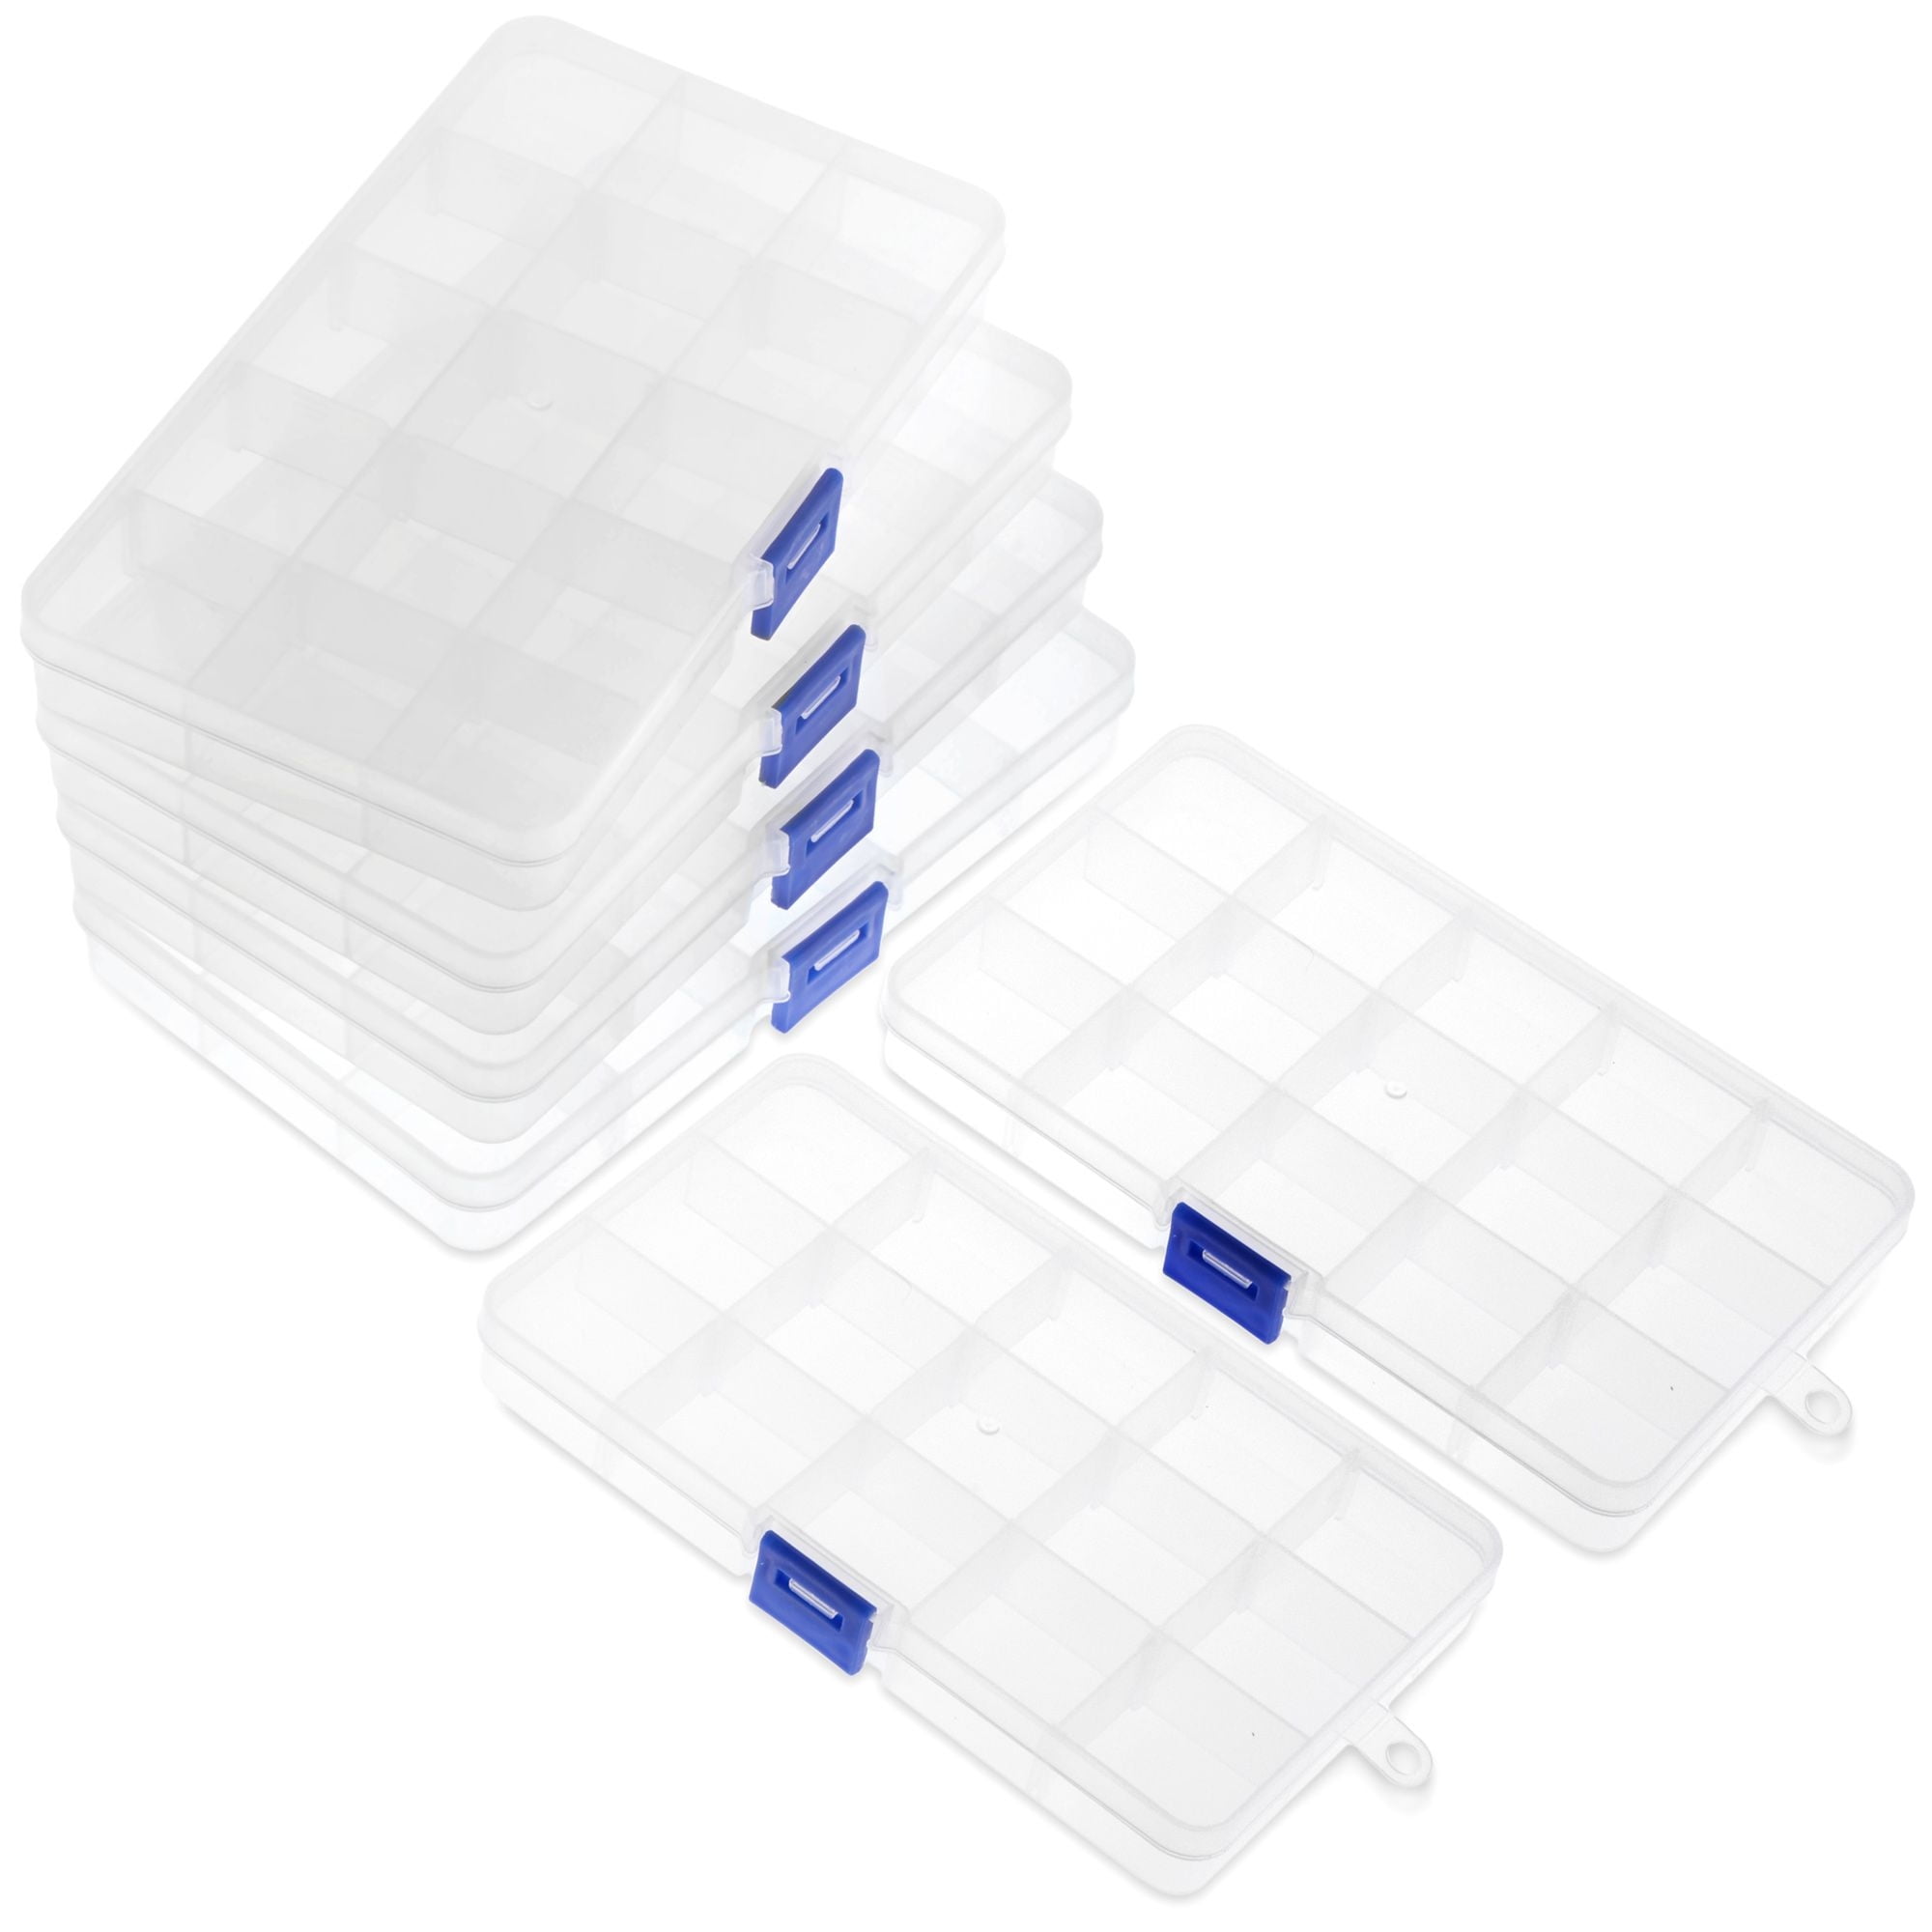 50 Pcs Mini Clear Plastic Boxes with Lids, Square Empty Beads Storage  Containers for Earplugs, Jewelry, Necklaces, Rings or Any Other Small Craft